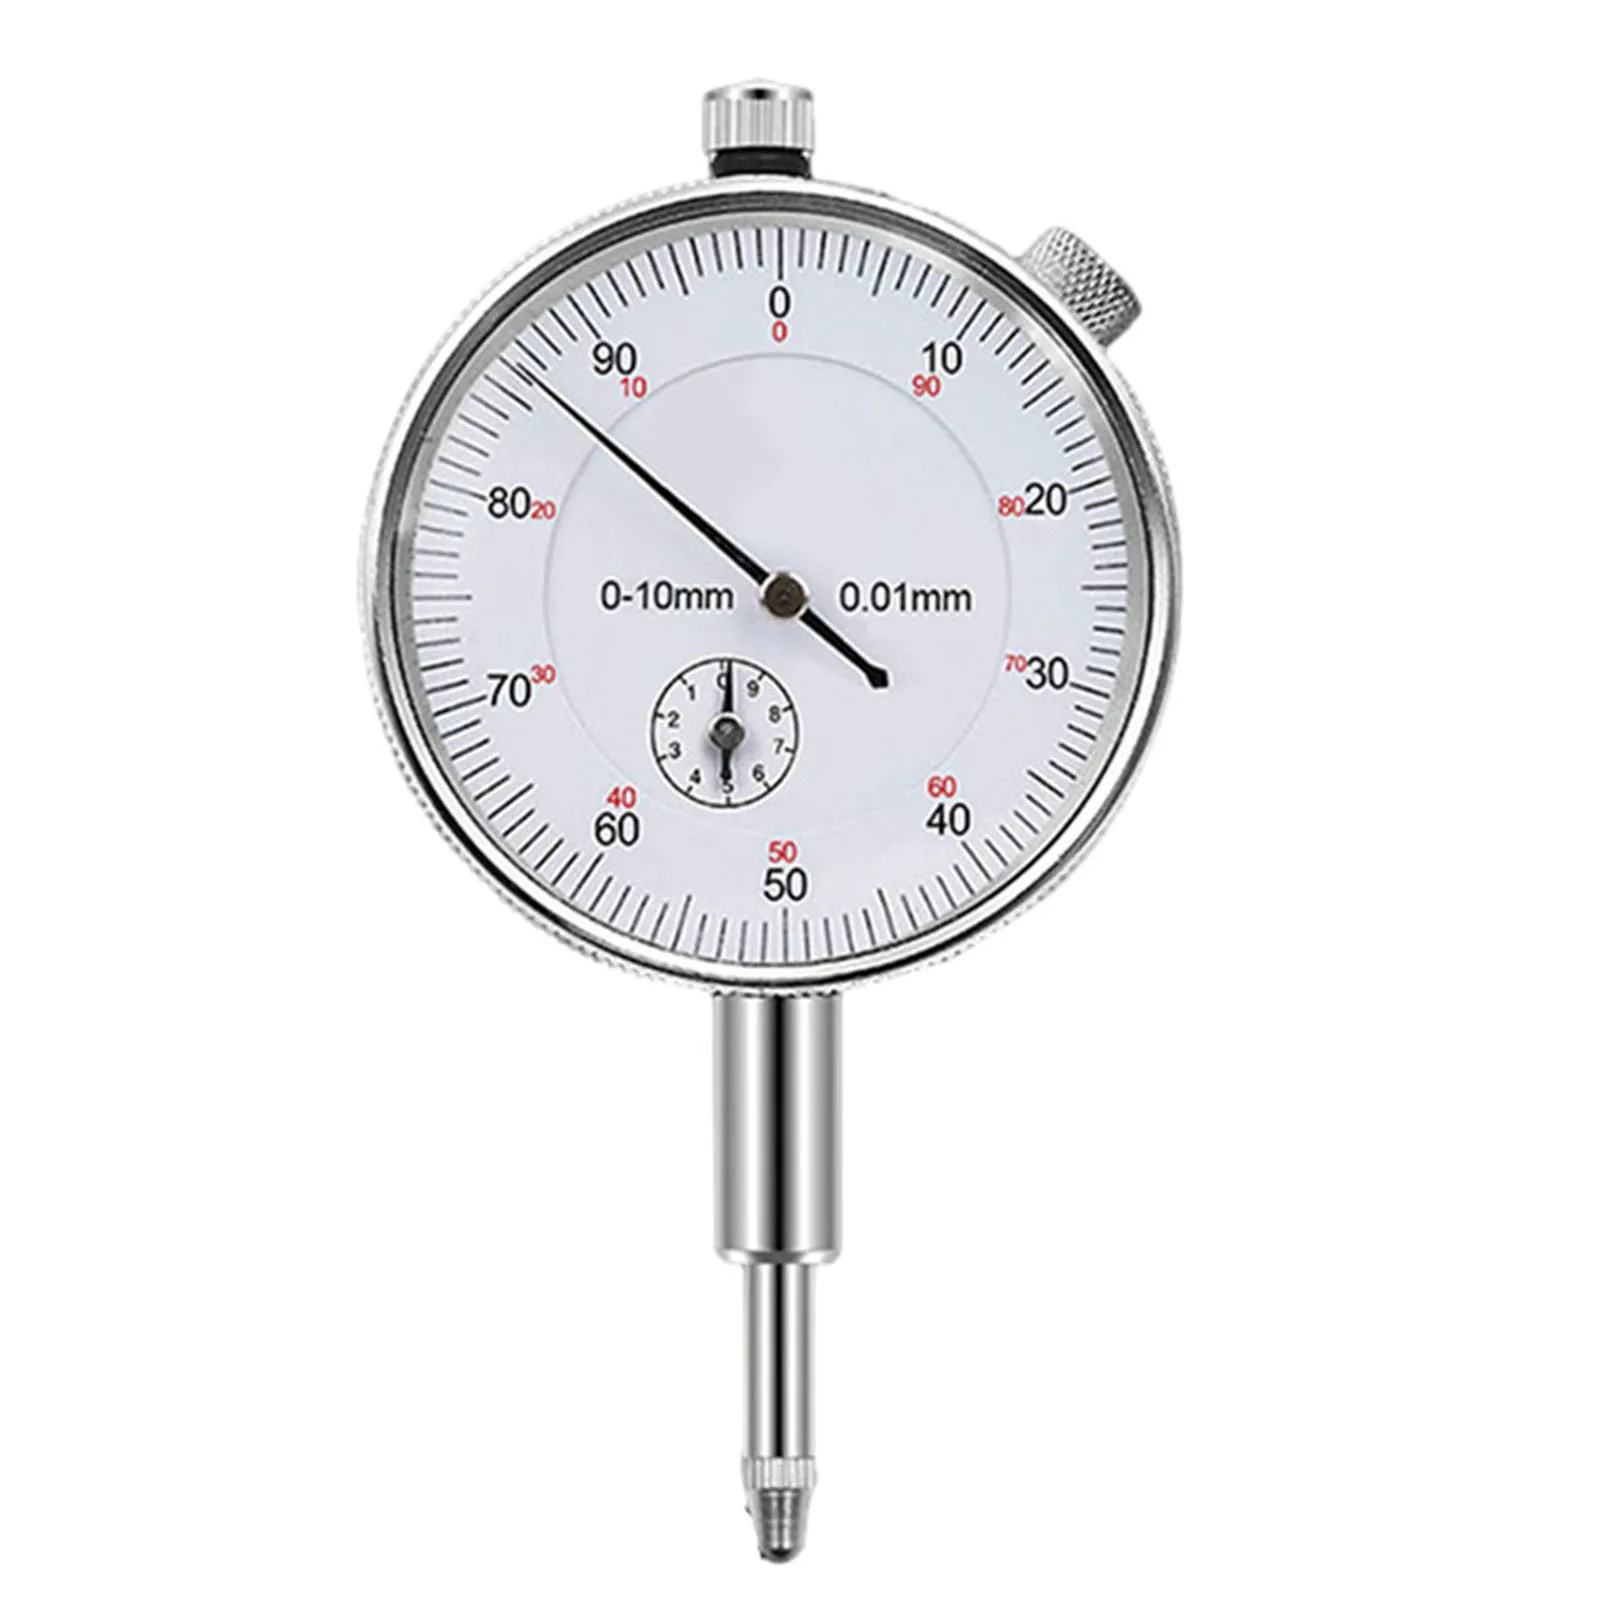 

Pointer Dial Indicator High Accuracy 0.01mm Dial Gauge Test Indicator 0-10 Mm Mechanical Percentage Indicator Measuring Tool